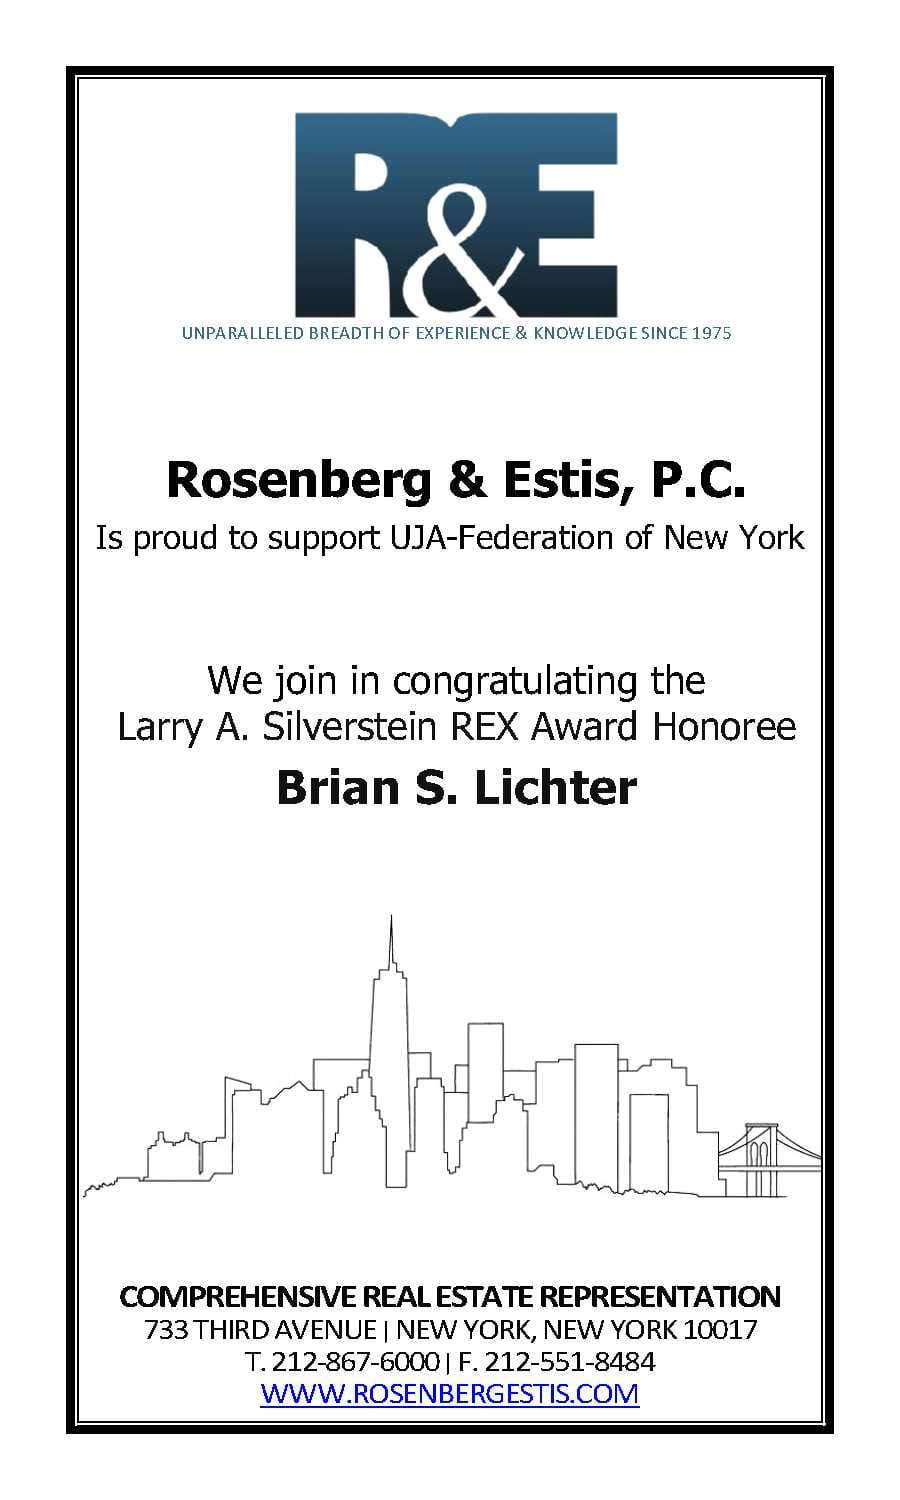 Rosenberg & Estis, P.C. is proud to support UJA-Federation of New York We join in congratulating the Larry A. Silverstein REX Award Honoree Brian S. Litcher